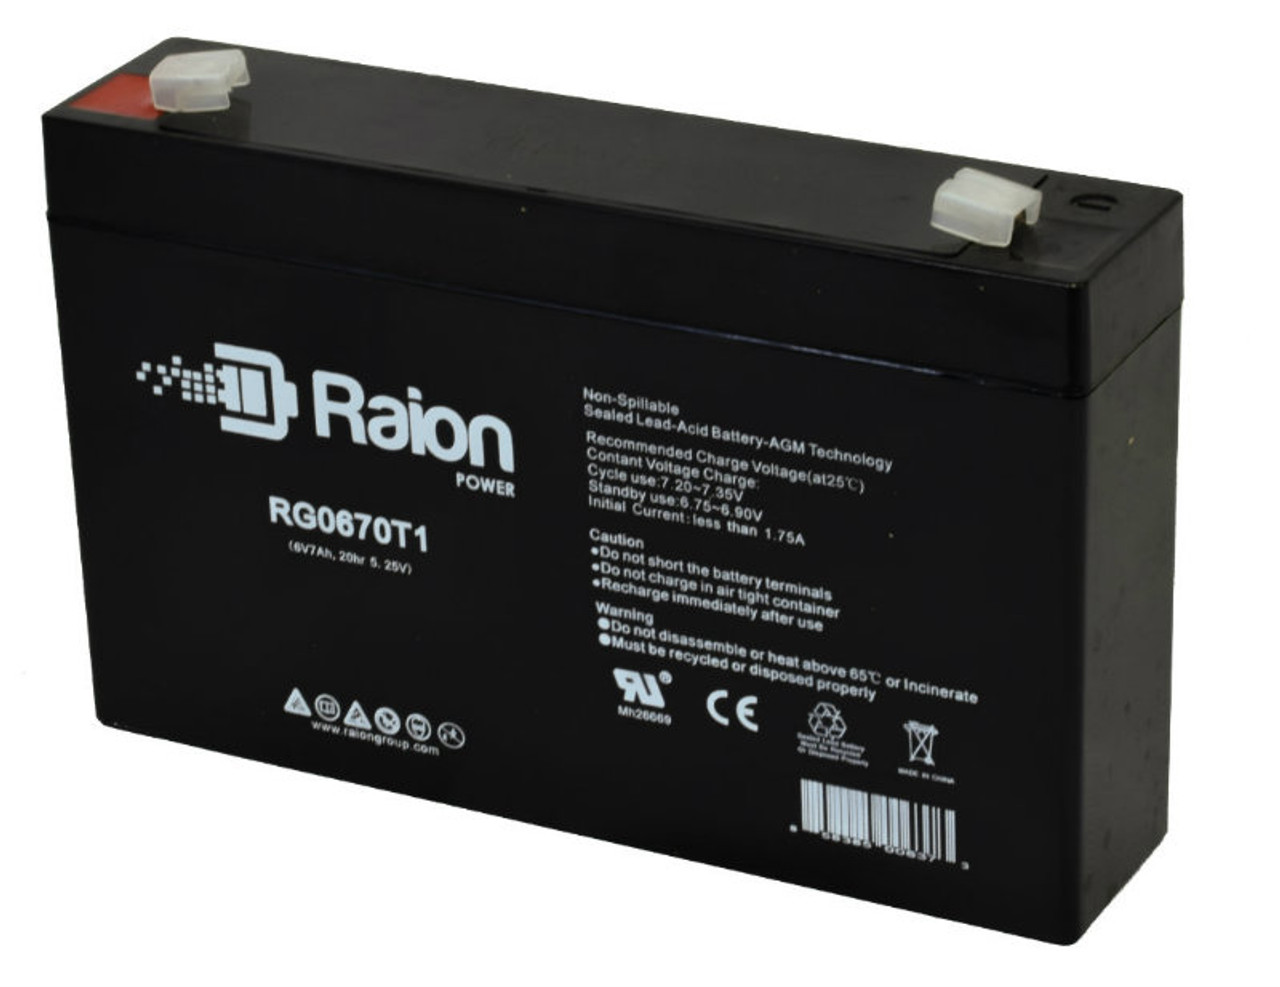 Raion Power 6V 7Ah Replacement Ride-On Toy Battery Cartridge for Fisher-Price Power Wheels C3493 Ford F-150